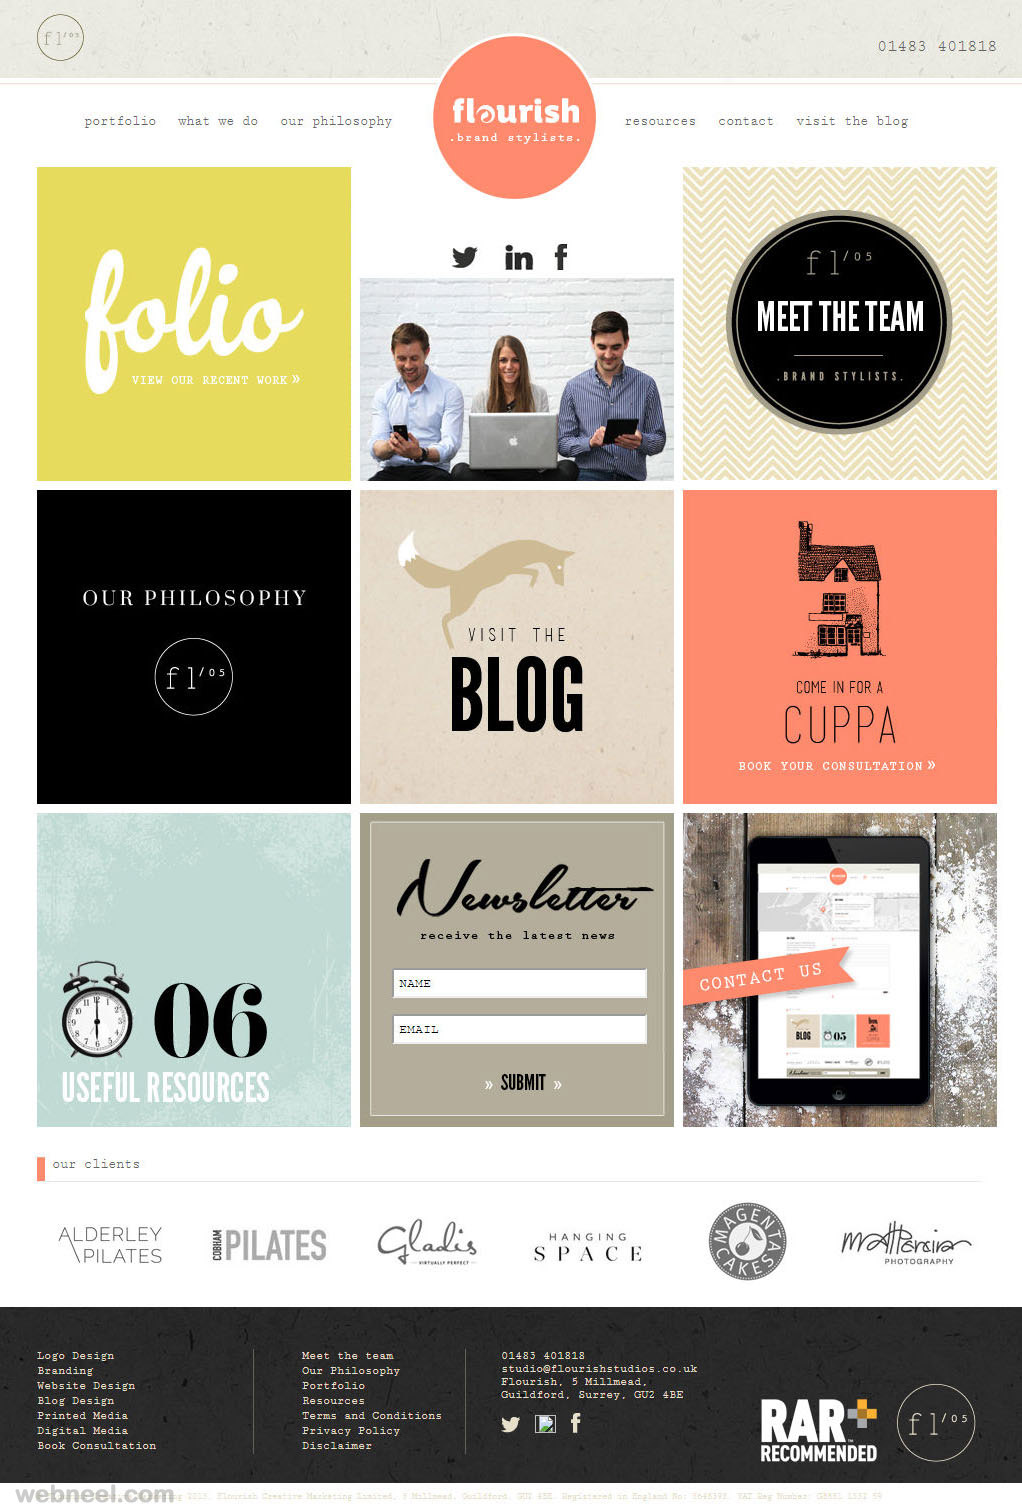 50 Most Beautiful Websites Design Examples For Your Inspiration Part 2